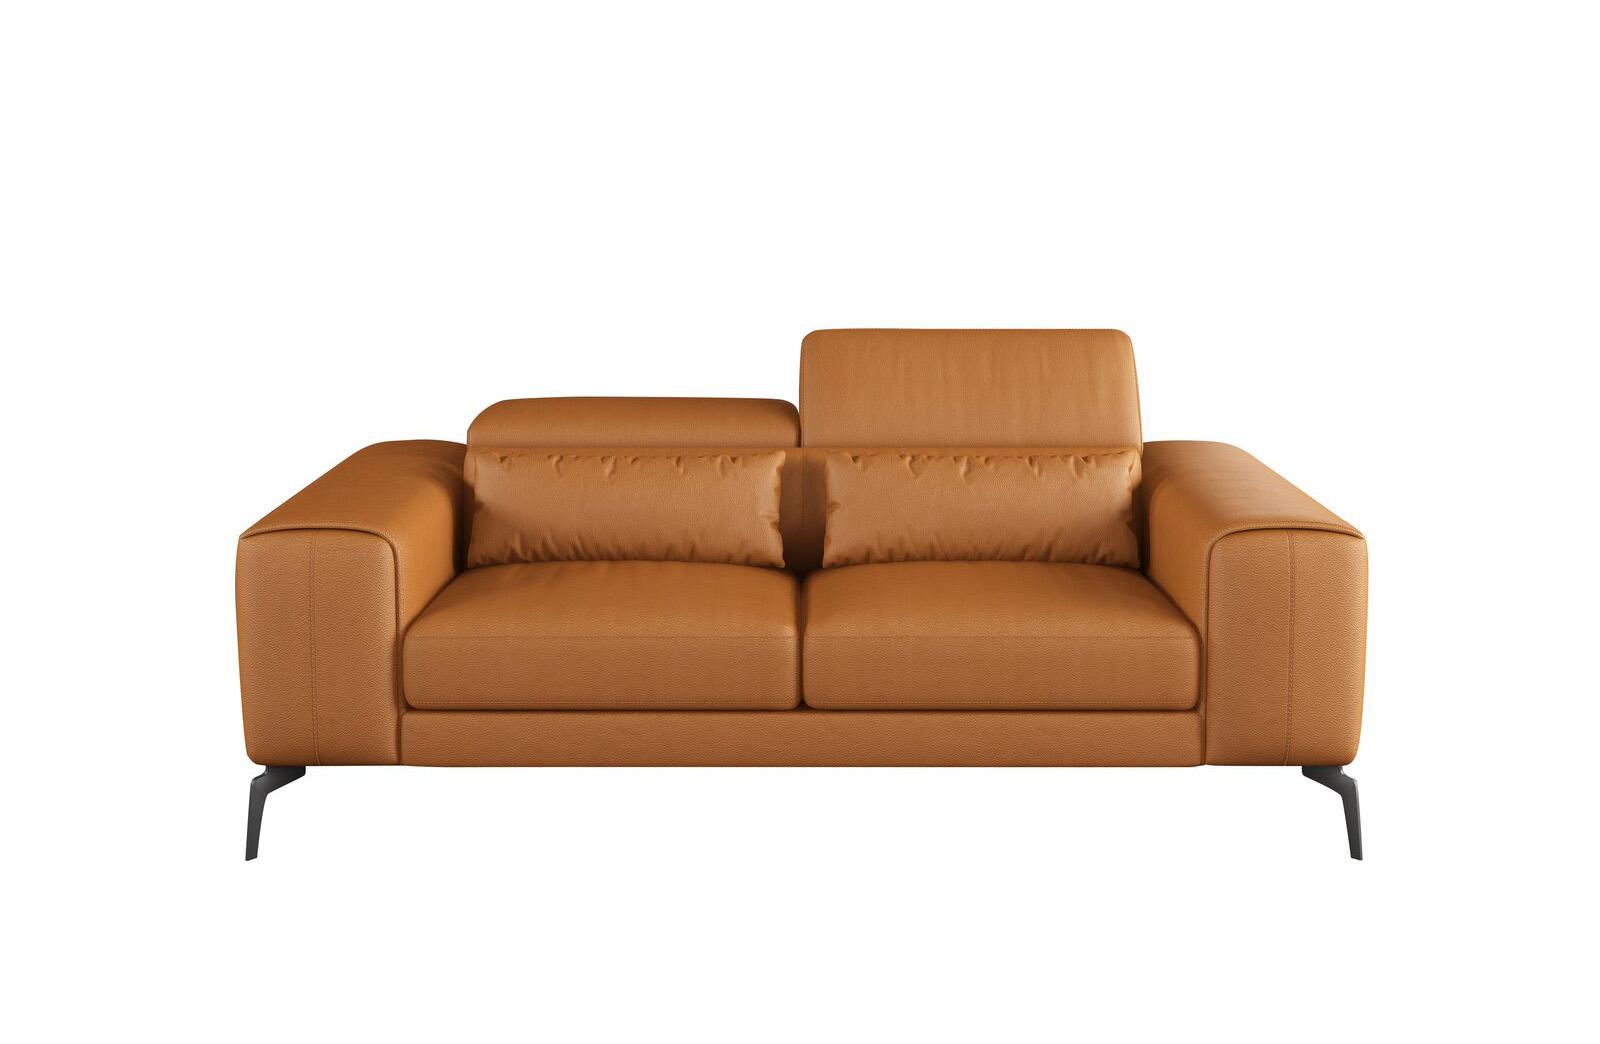 Contemporary, Modern Loveseat CAVOUR EF-12551-L in Cognac Leather